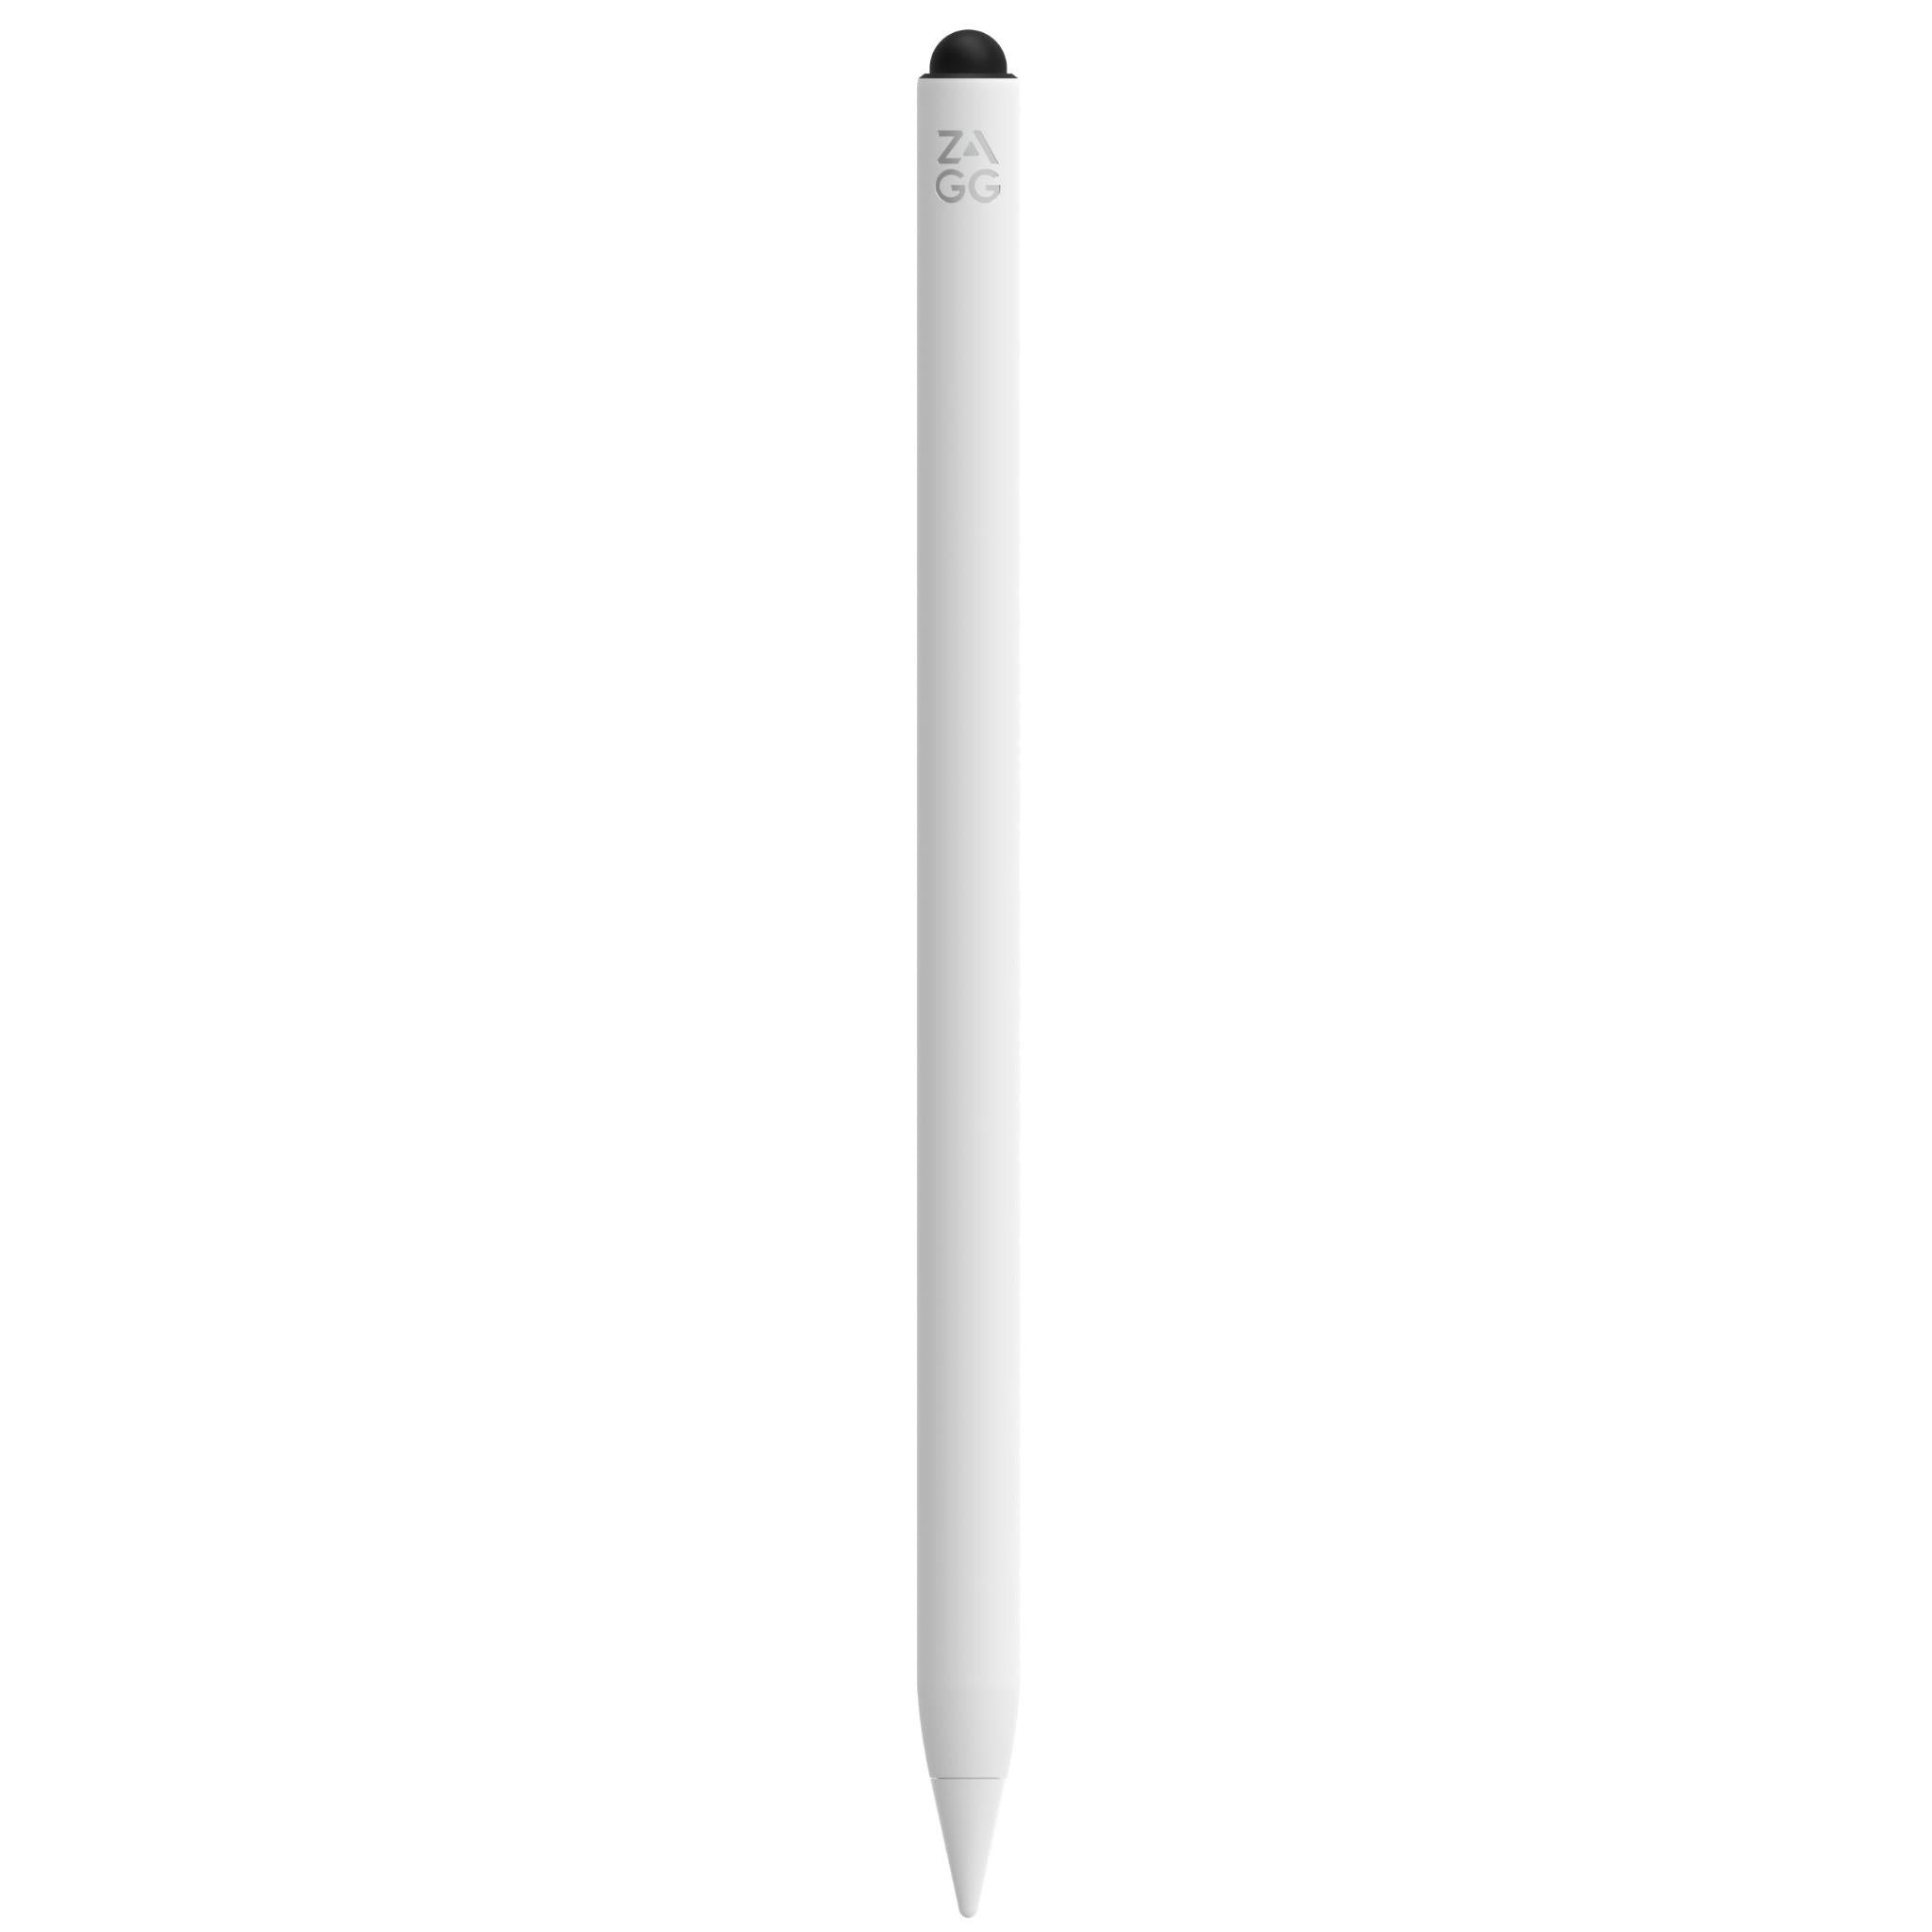 zagg pro stylus 2 pencil with wireless charging adapter (white)